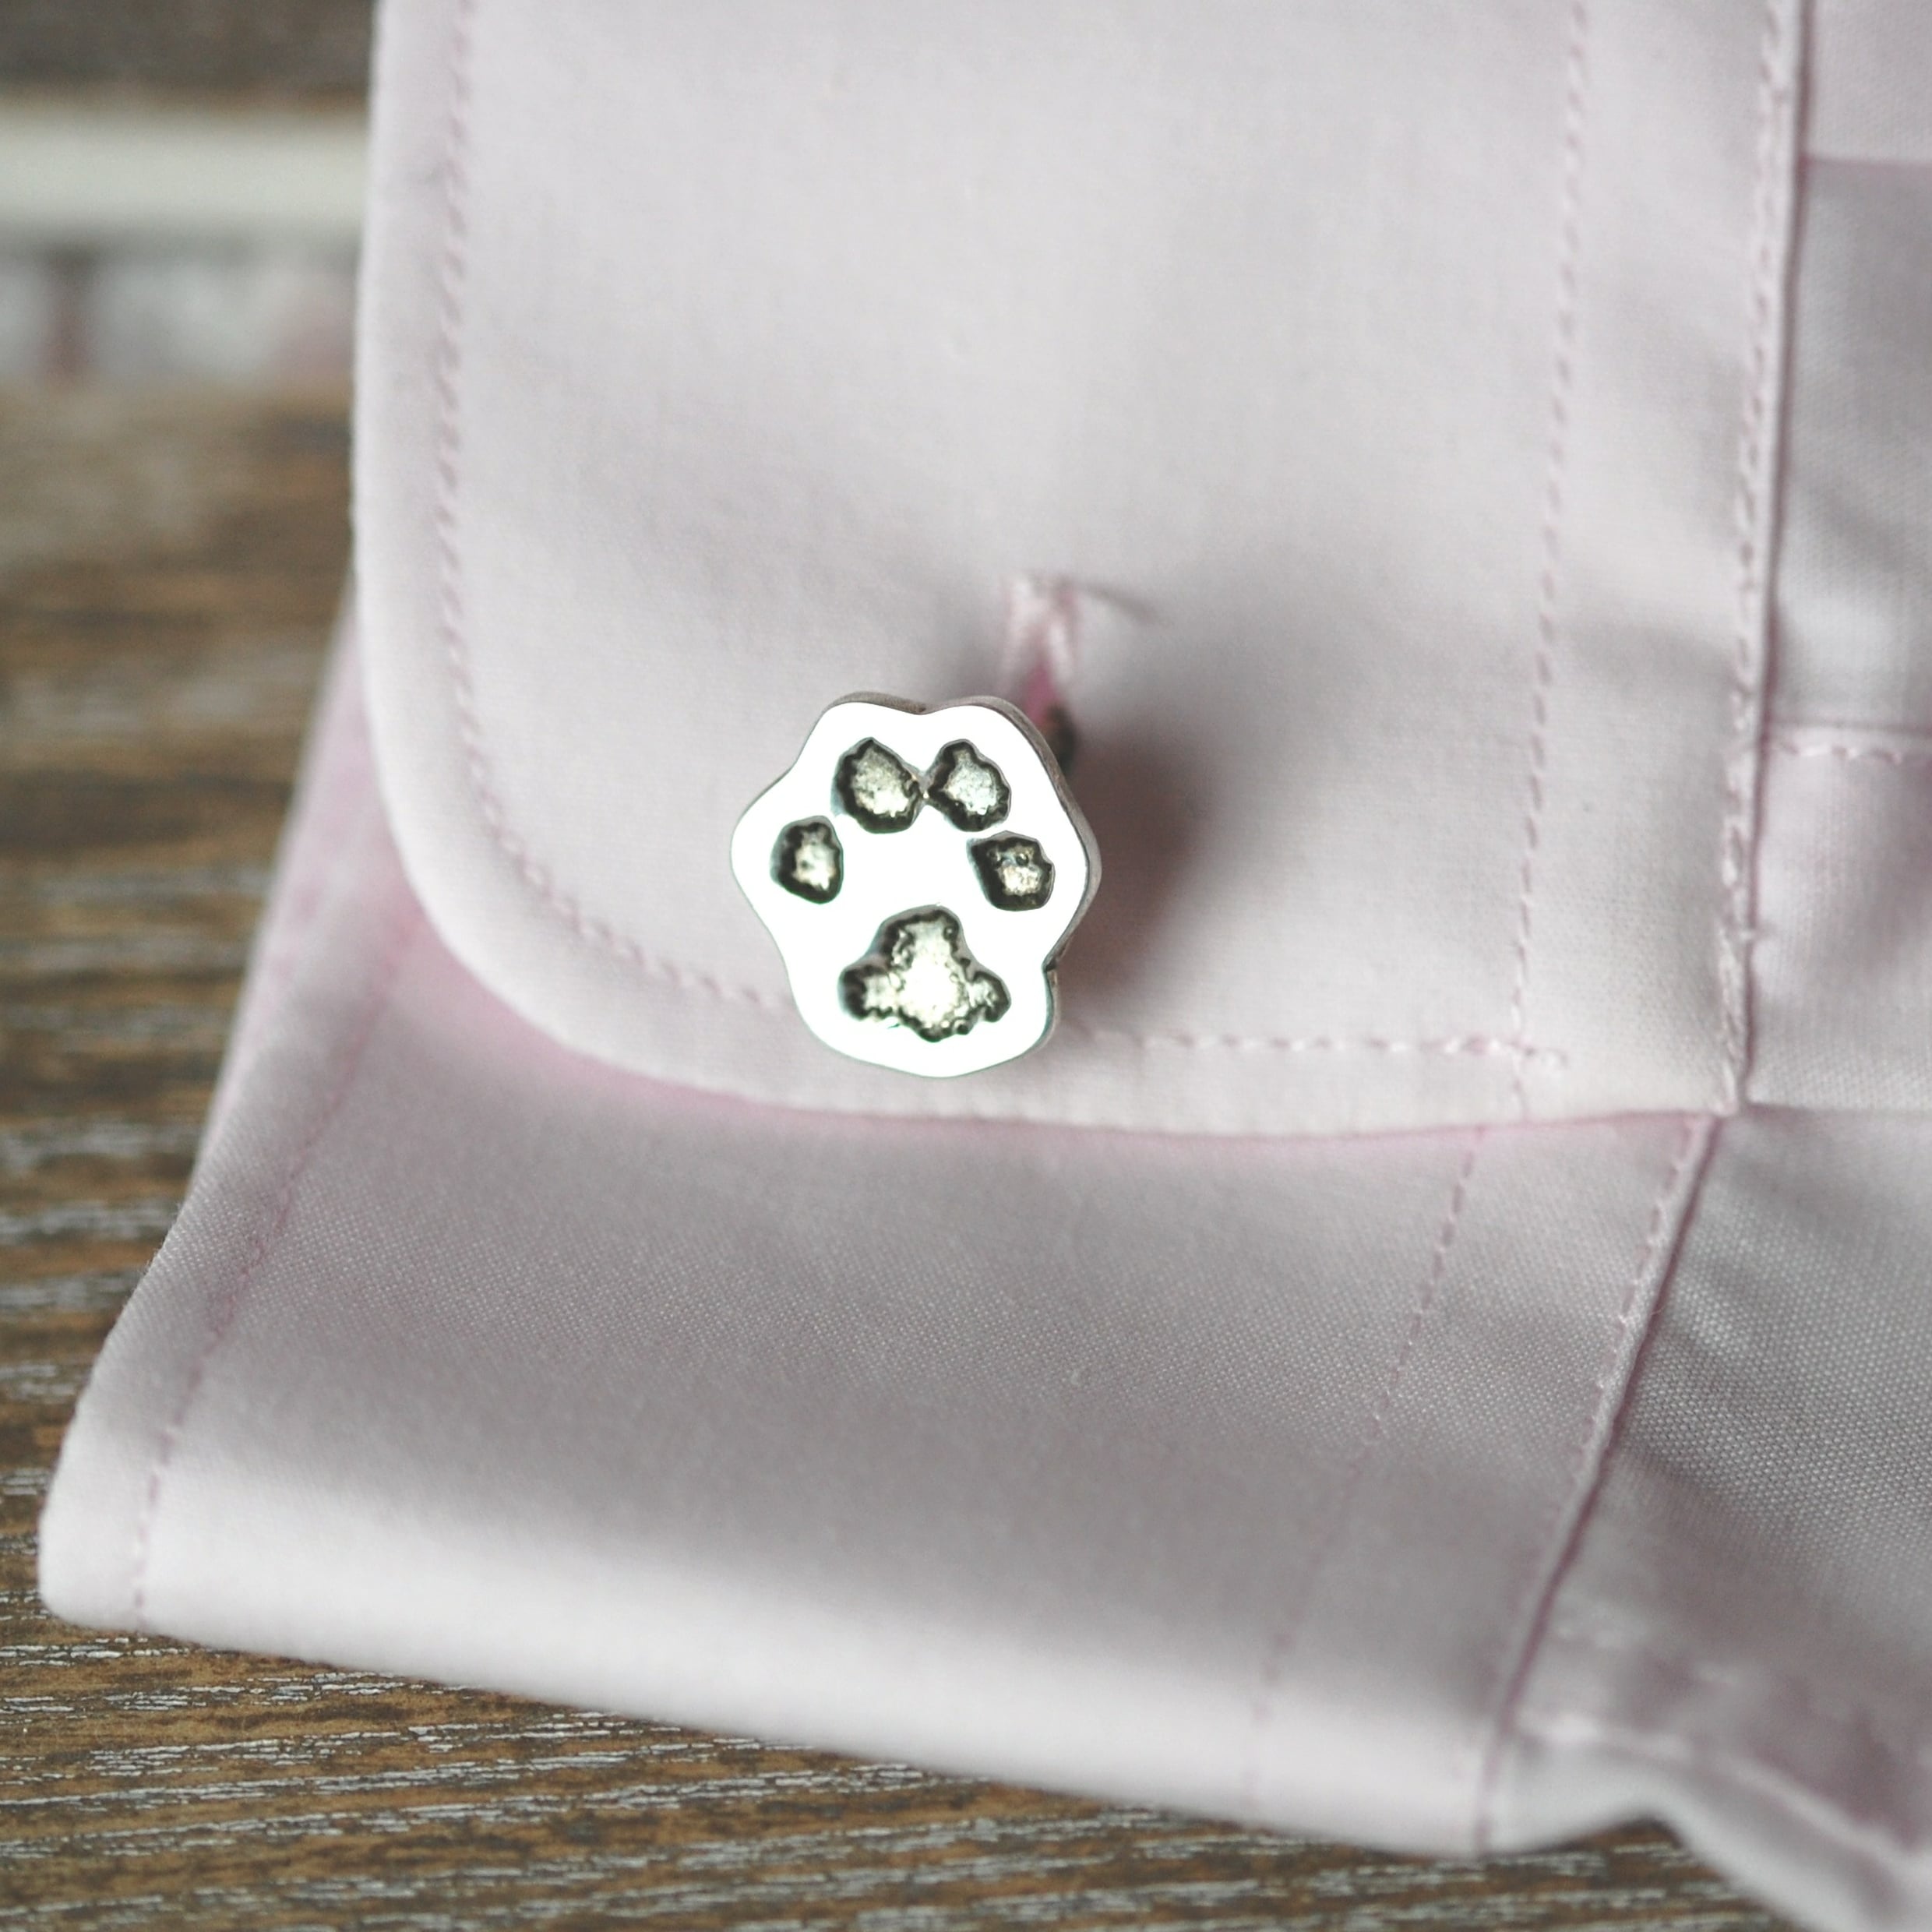 Silver cufflink cut out in the shape of your pet's unique paw print